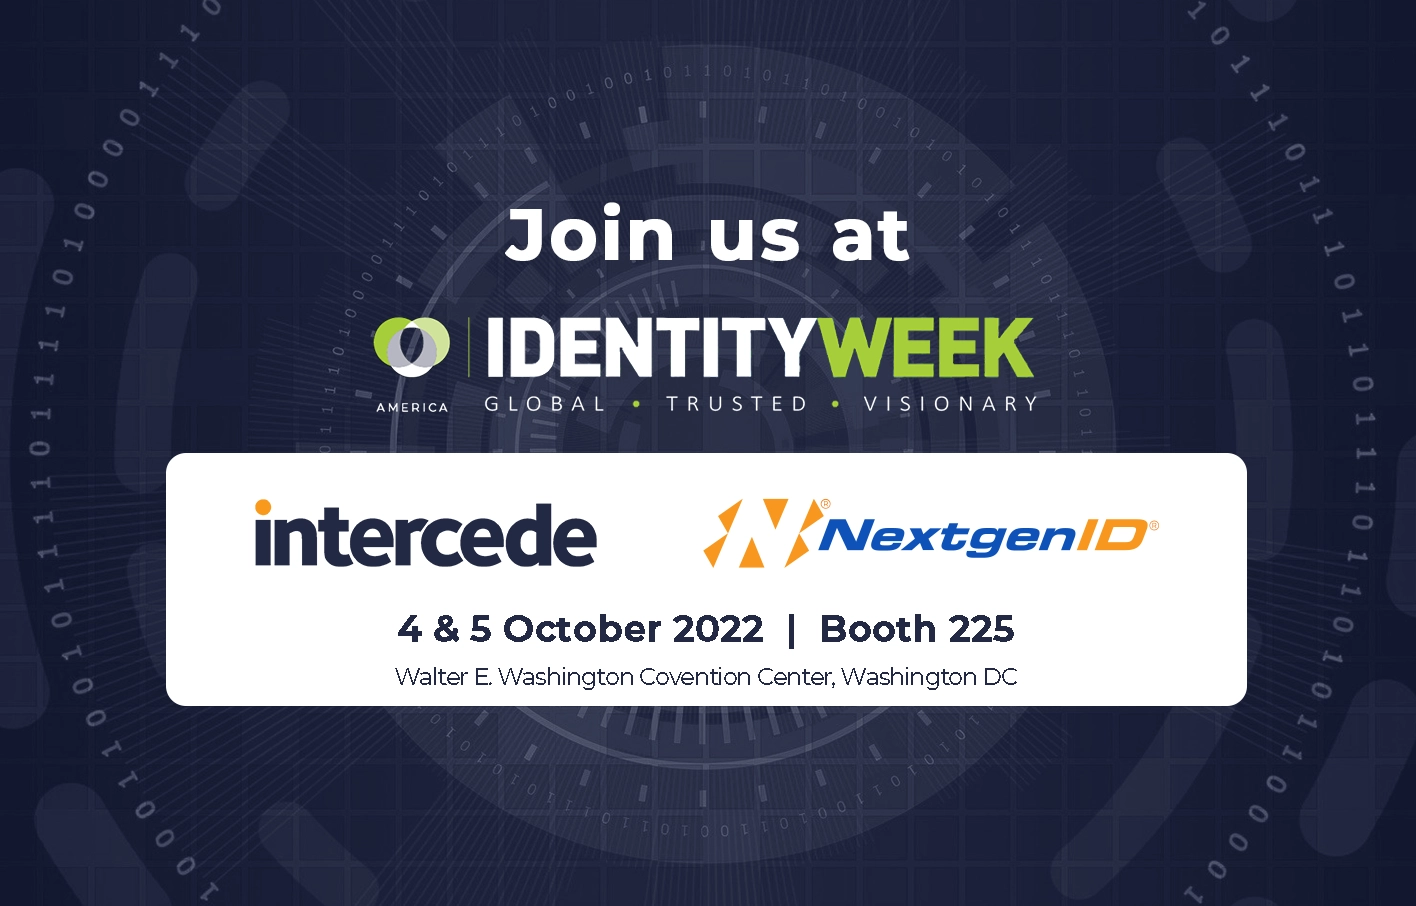 Join us at Identity Week